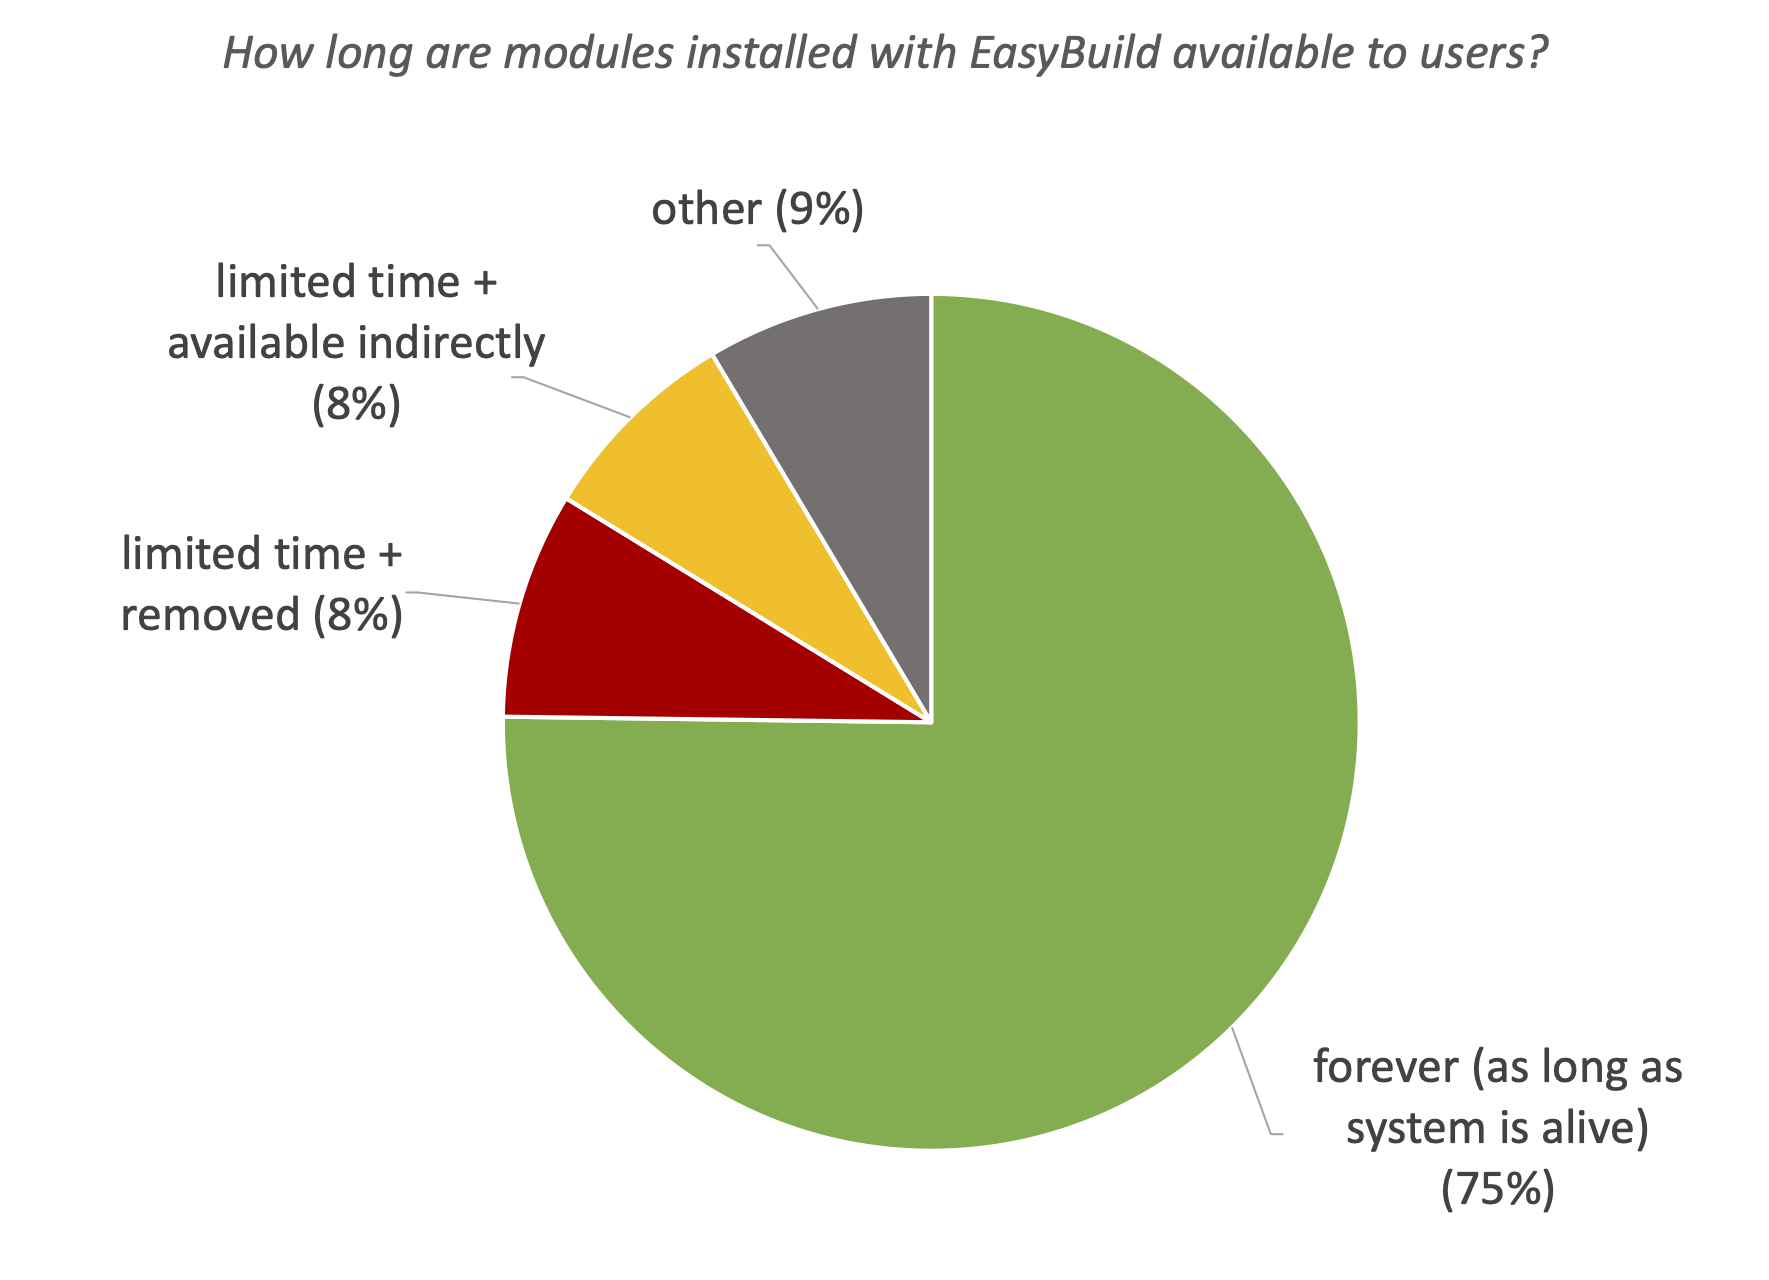 43. How long are modules installed with EasyBuild available to users?